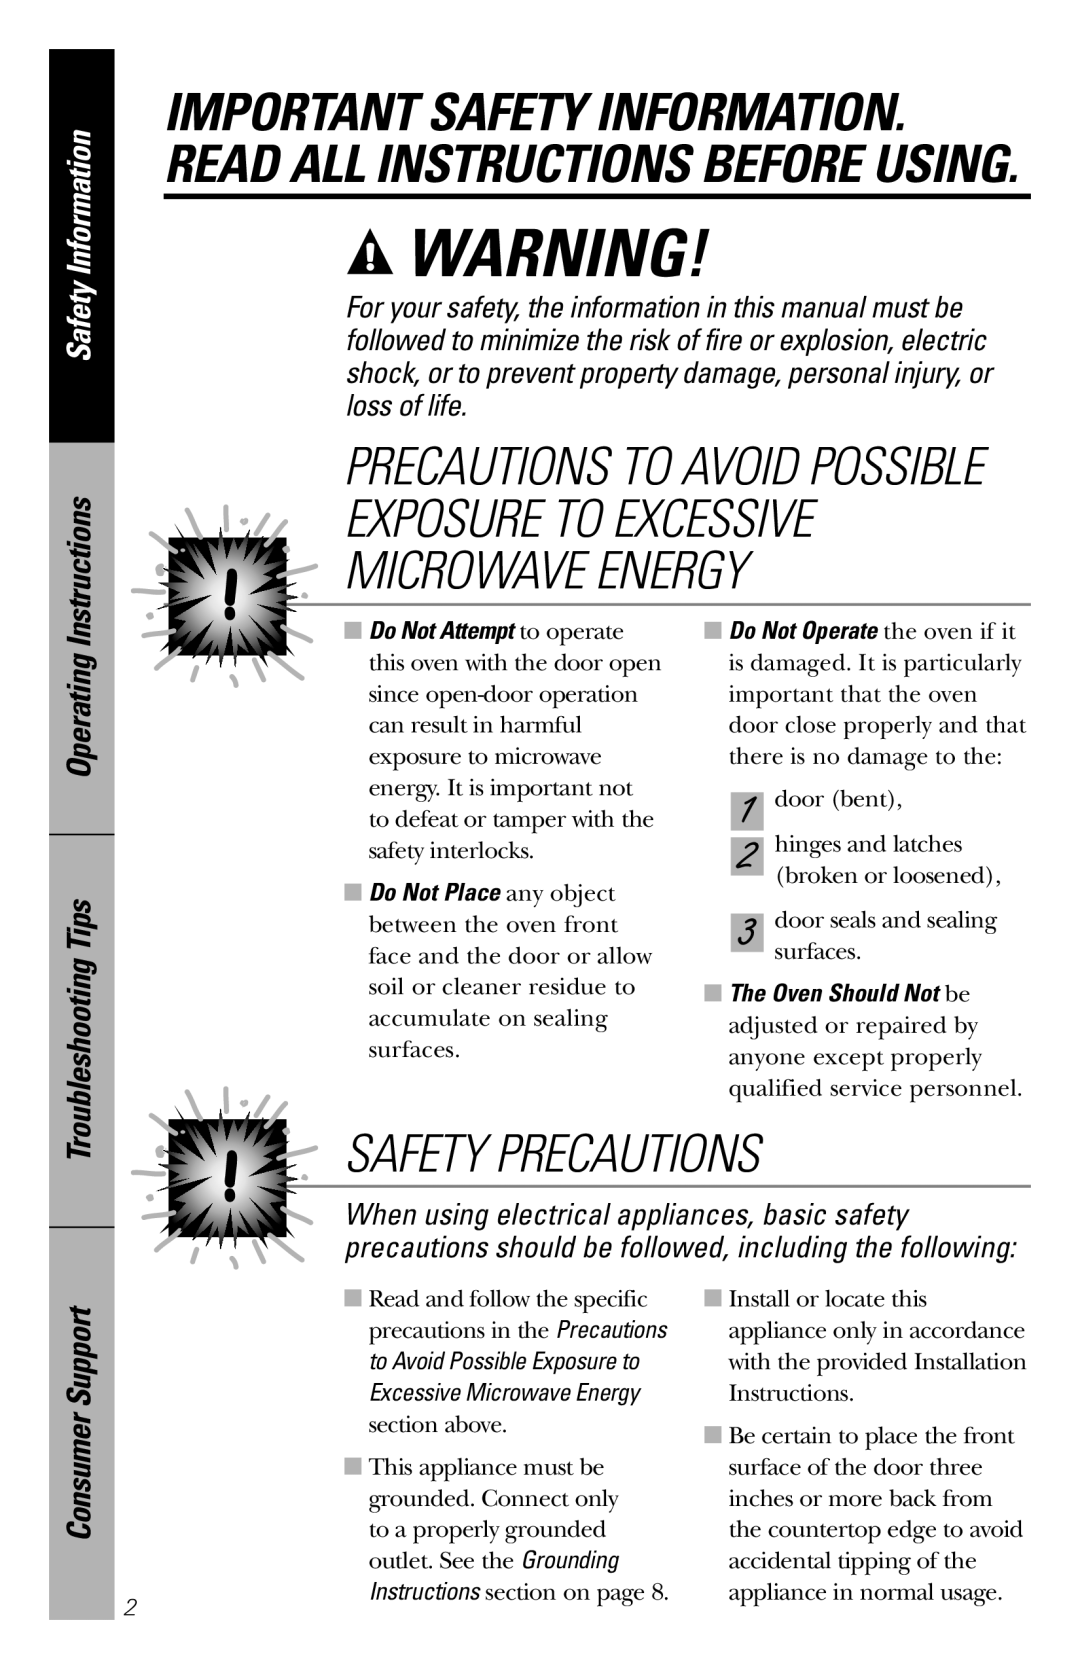 GE JES1358 Safety Precautions, Safety Information, Instructions, Operating Troubleshooting Tips, Consumer Support 